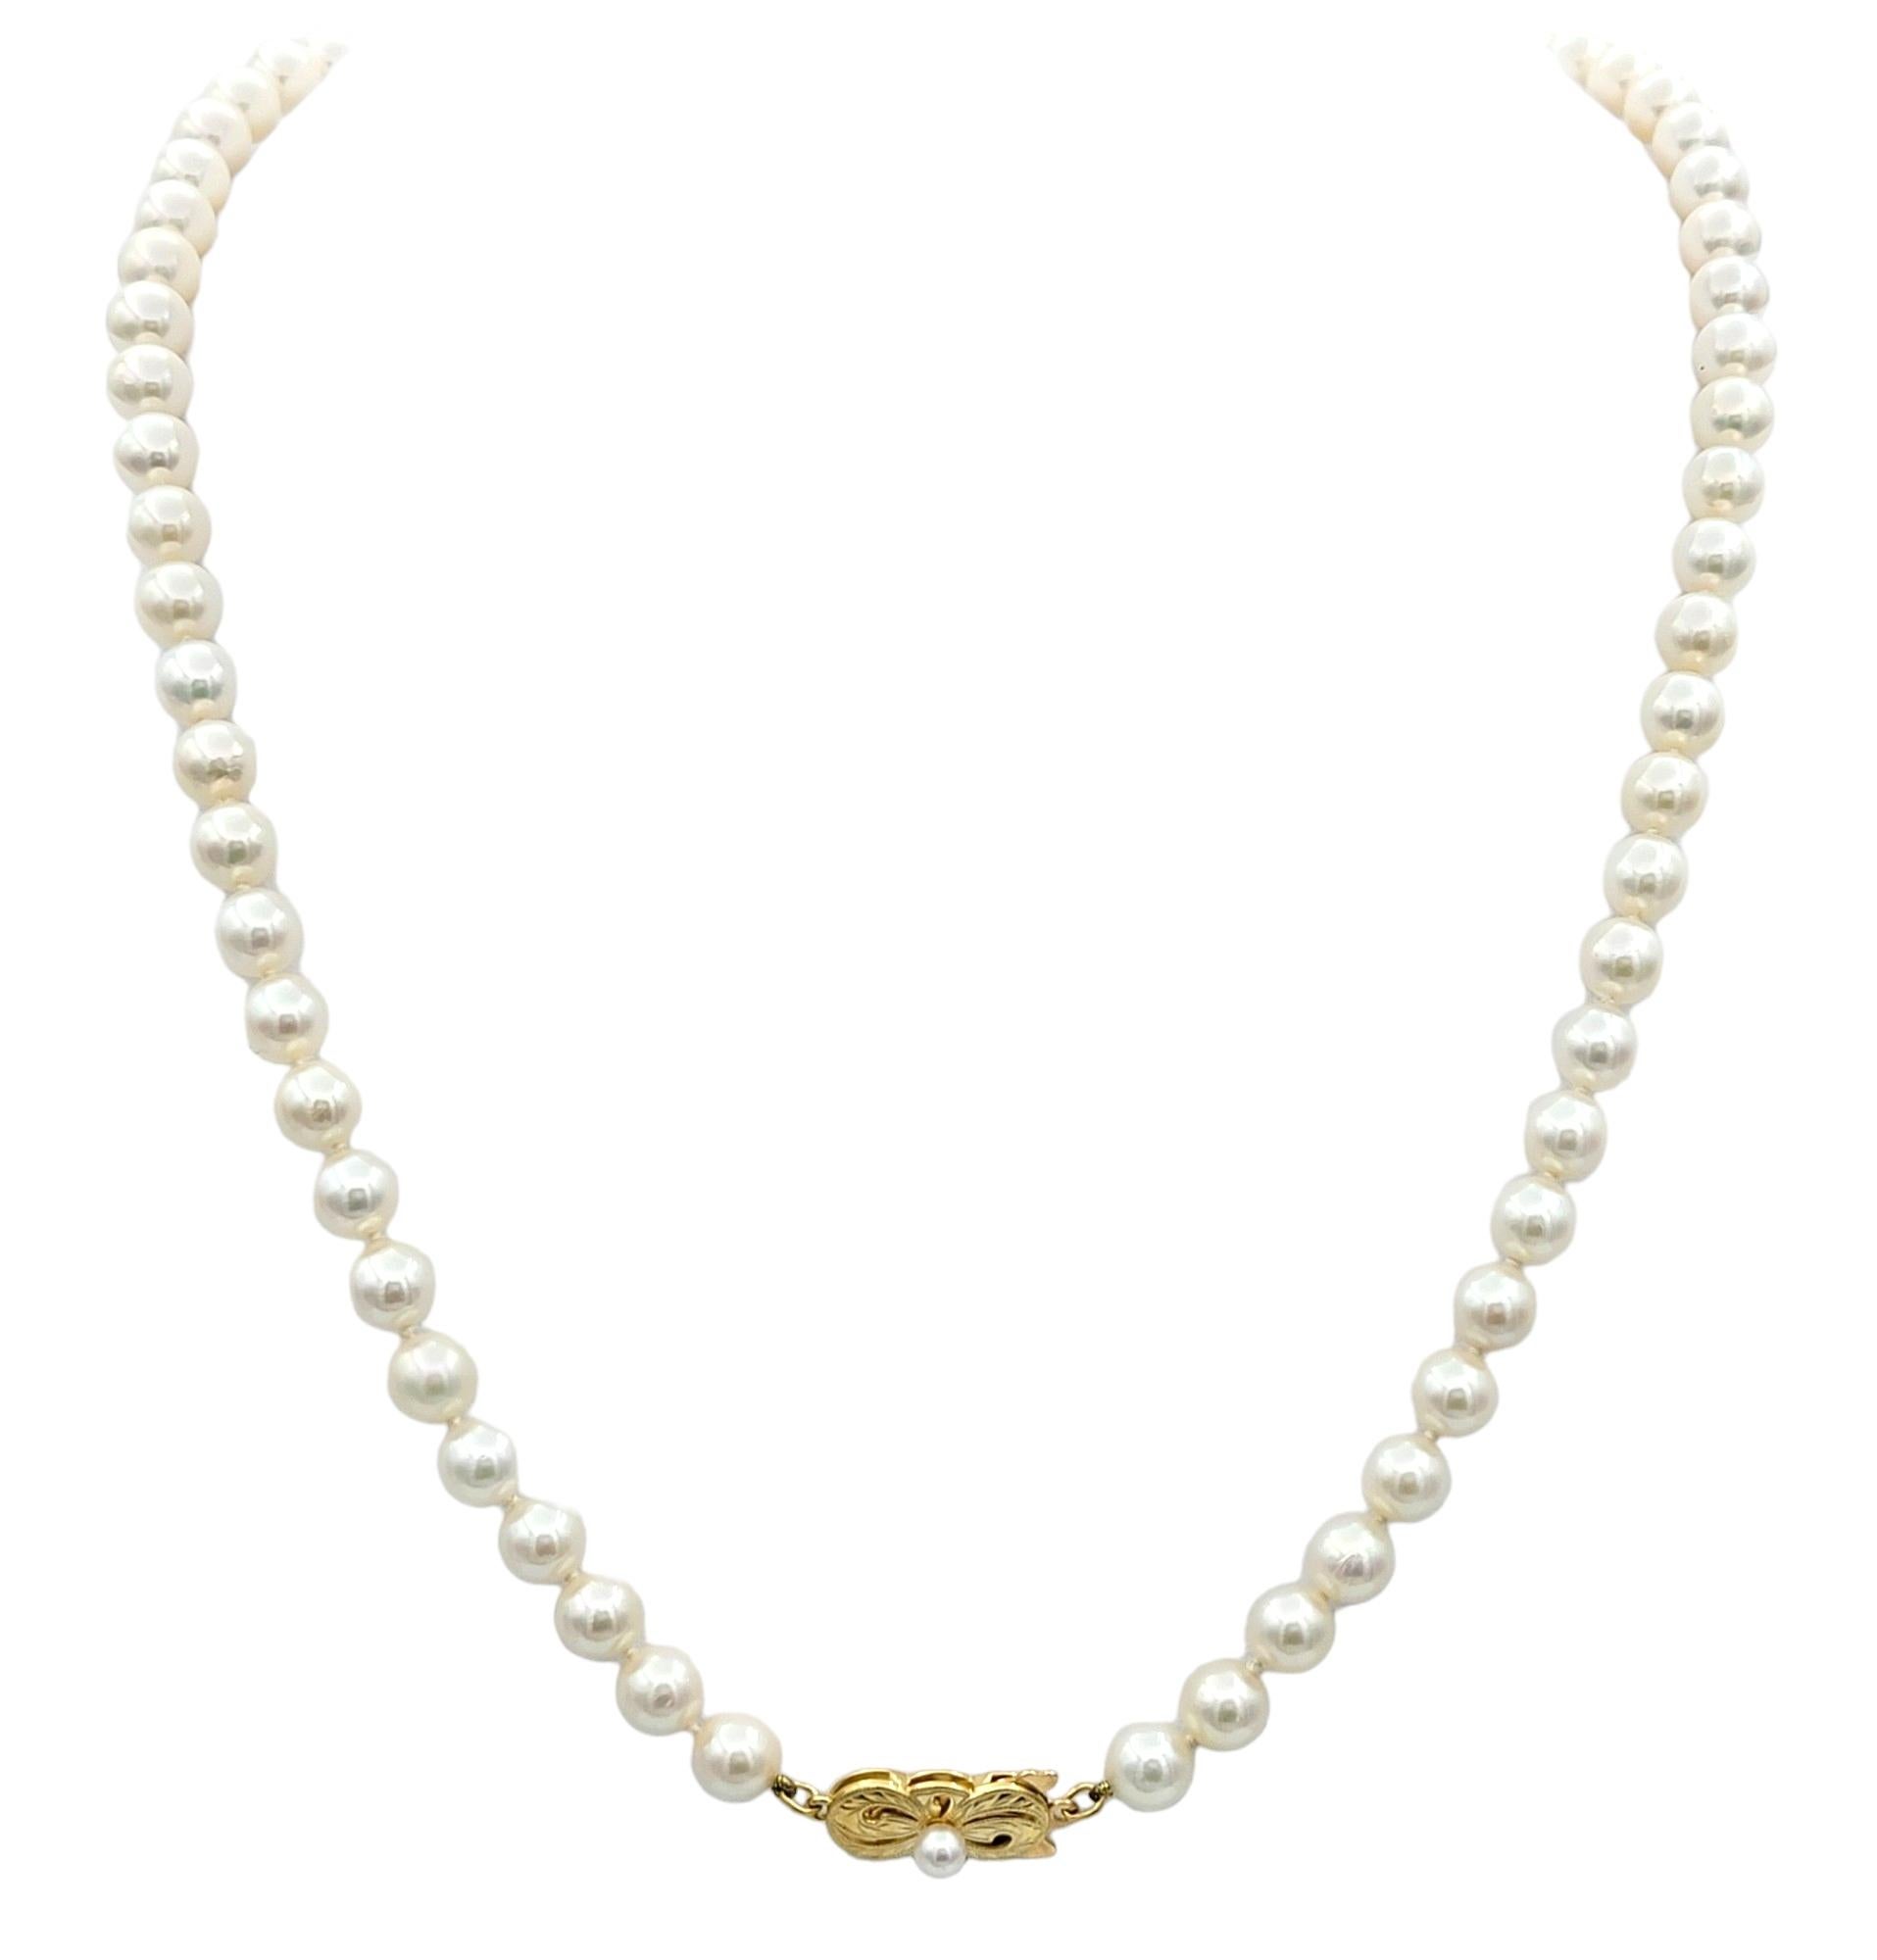 This Mikimoto cultured Akoya pearl necklace exudes timeless elegance with its lustrous pearls and classic design. Each pearl is carefully selected for its high quality and uniformity, creating a seamless string of radiant beauty. The pearls are held